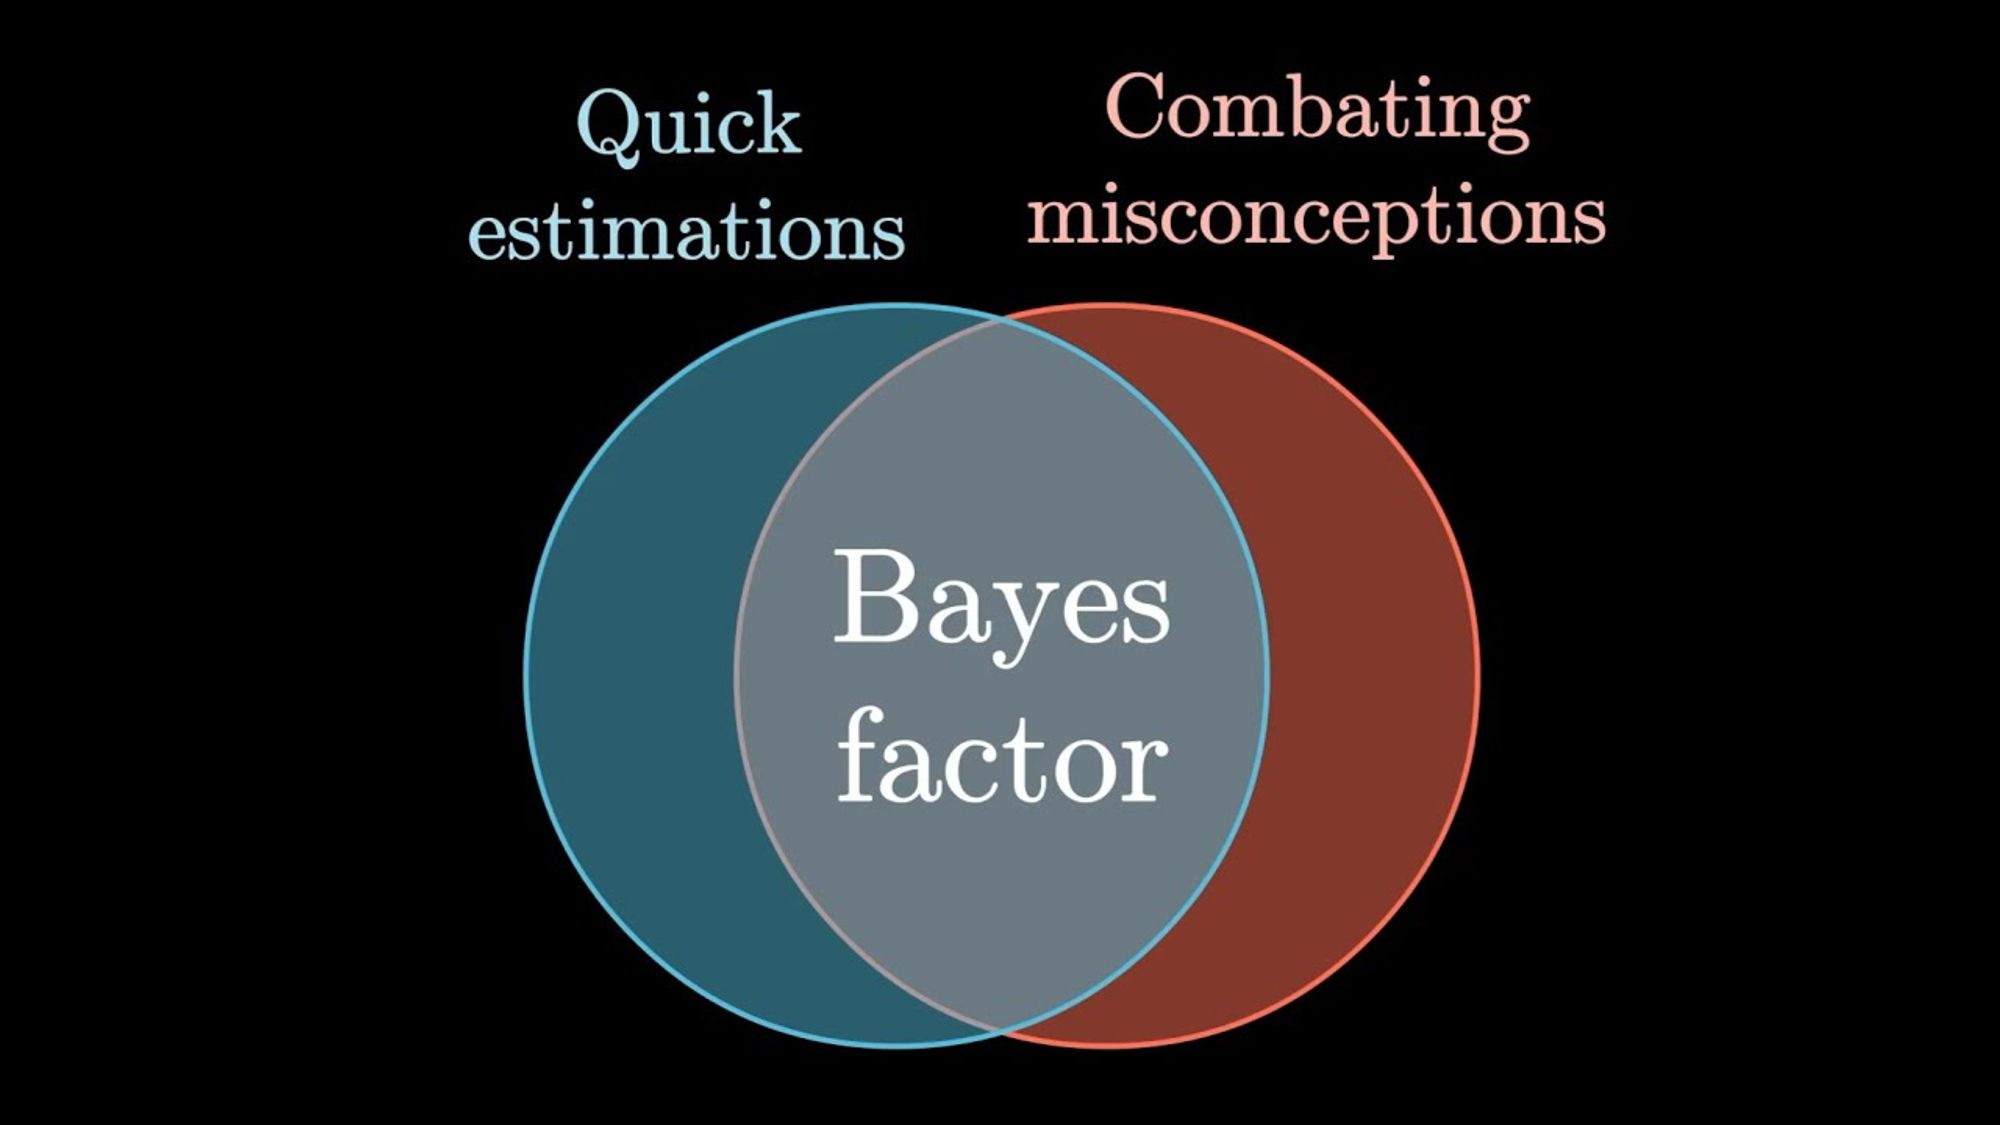 The medical test paradox, and redesigning Bayes' rule